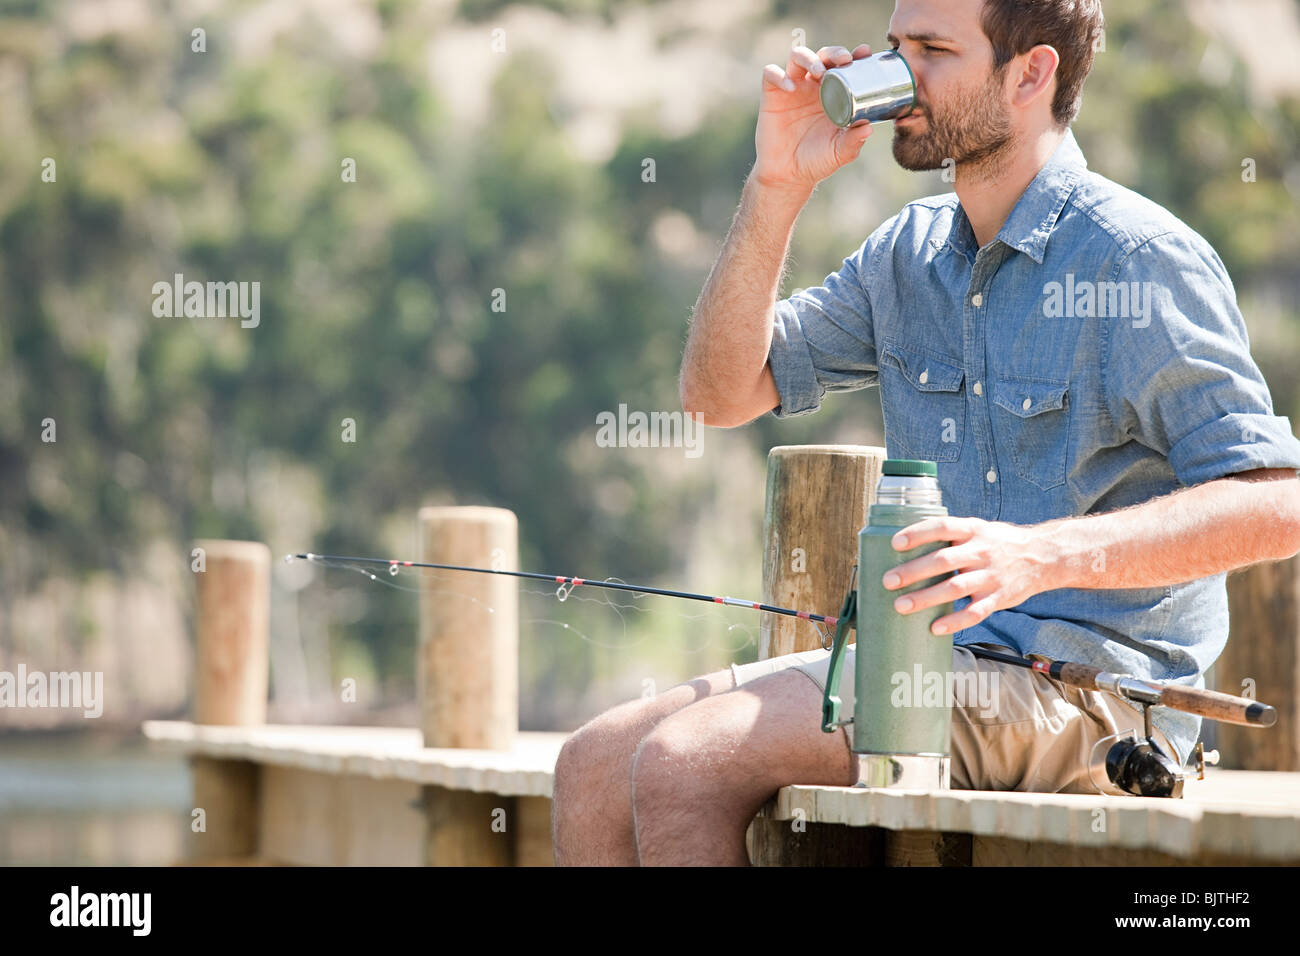 Man with fishing rod and hot drink Stock Photo